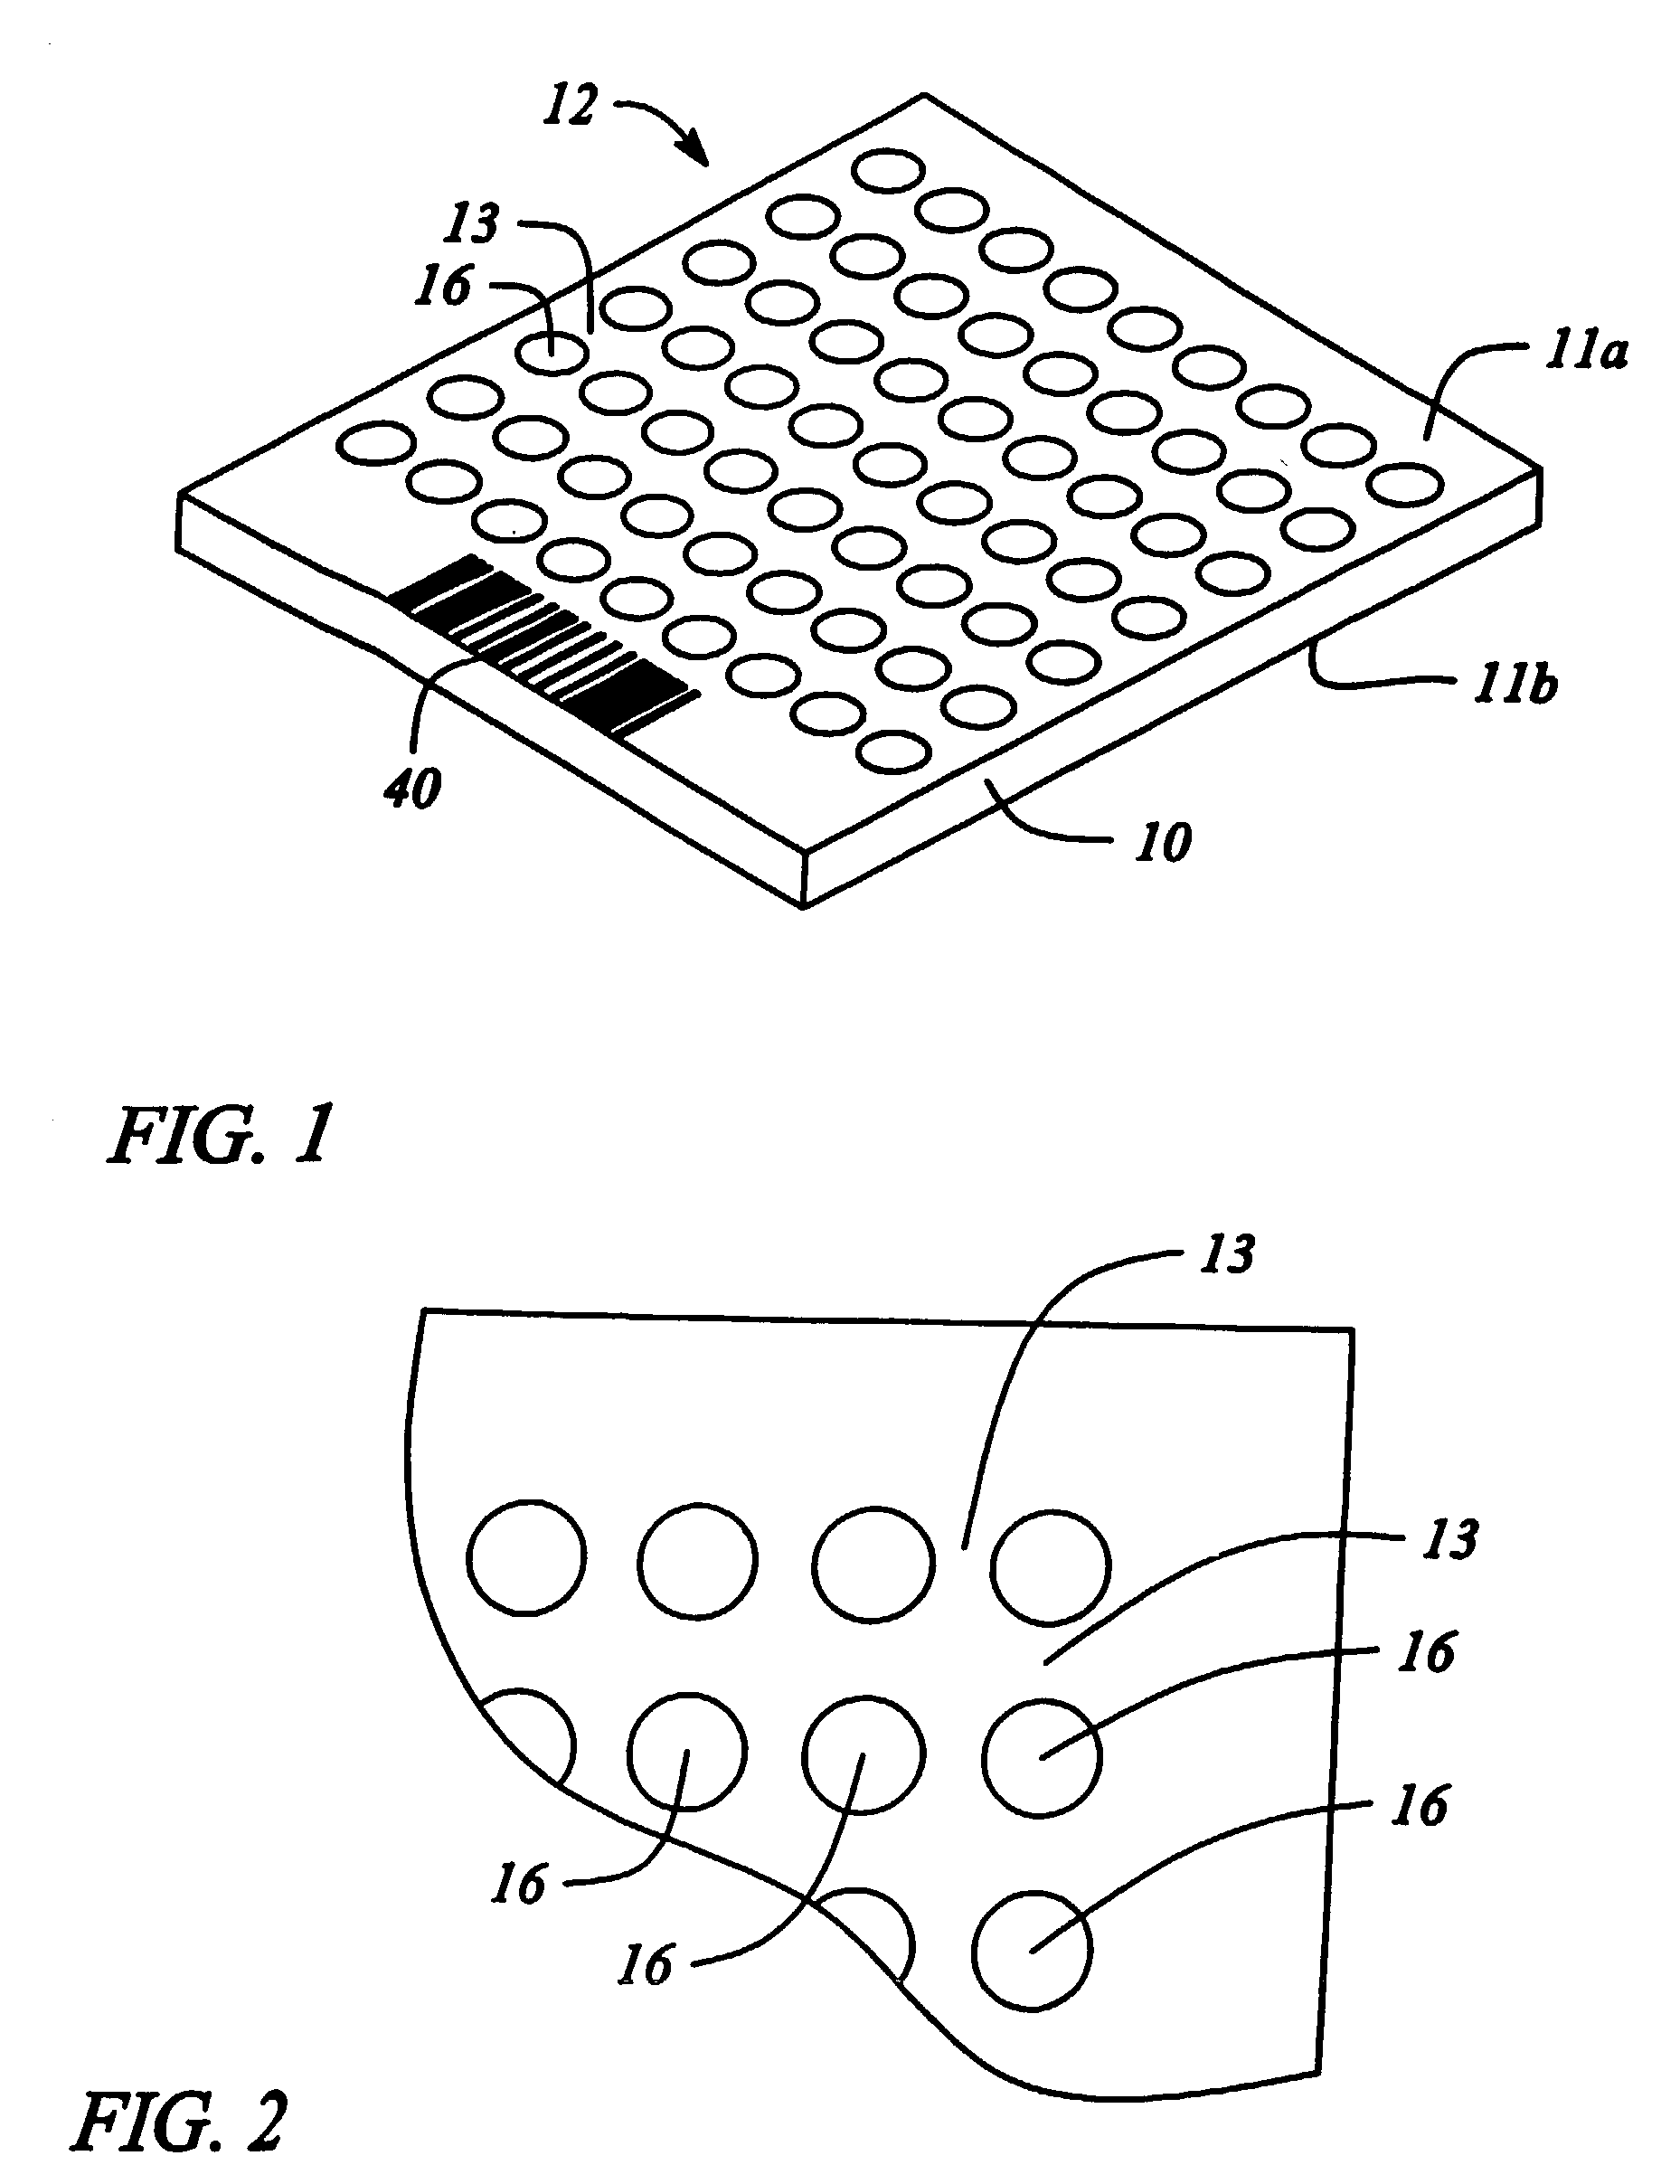 Micro arrays with structured and unstructured probes